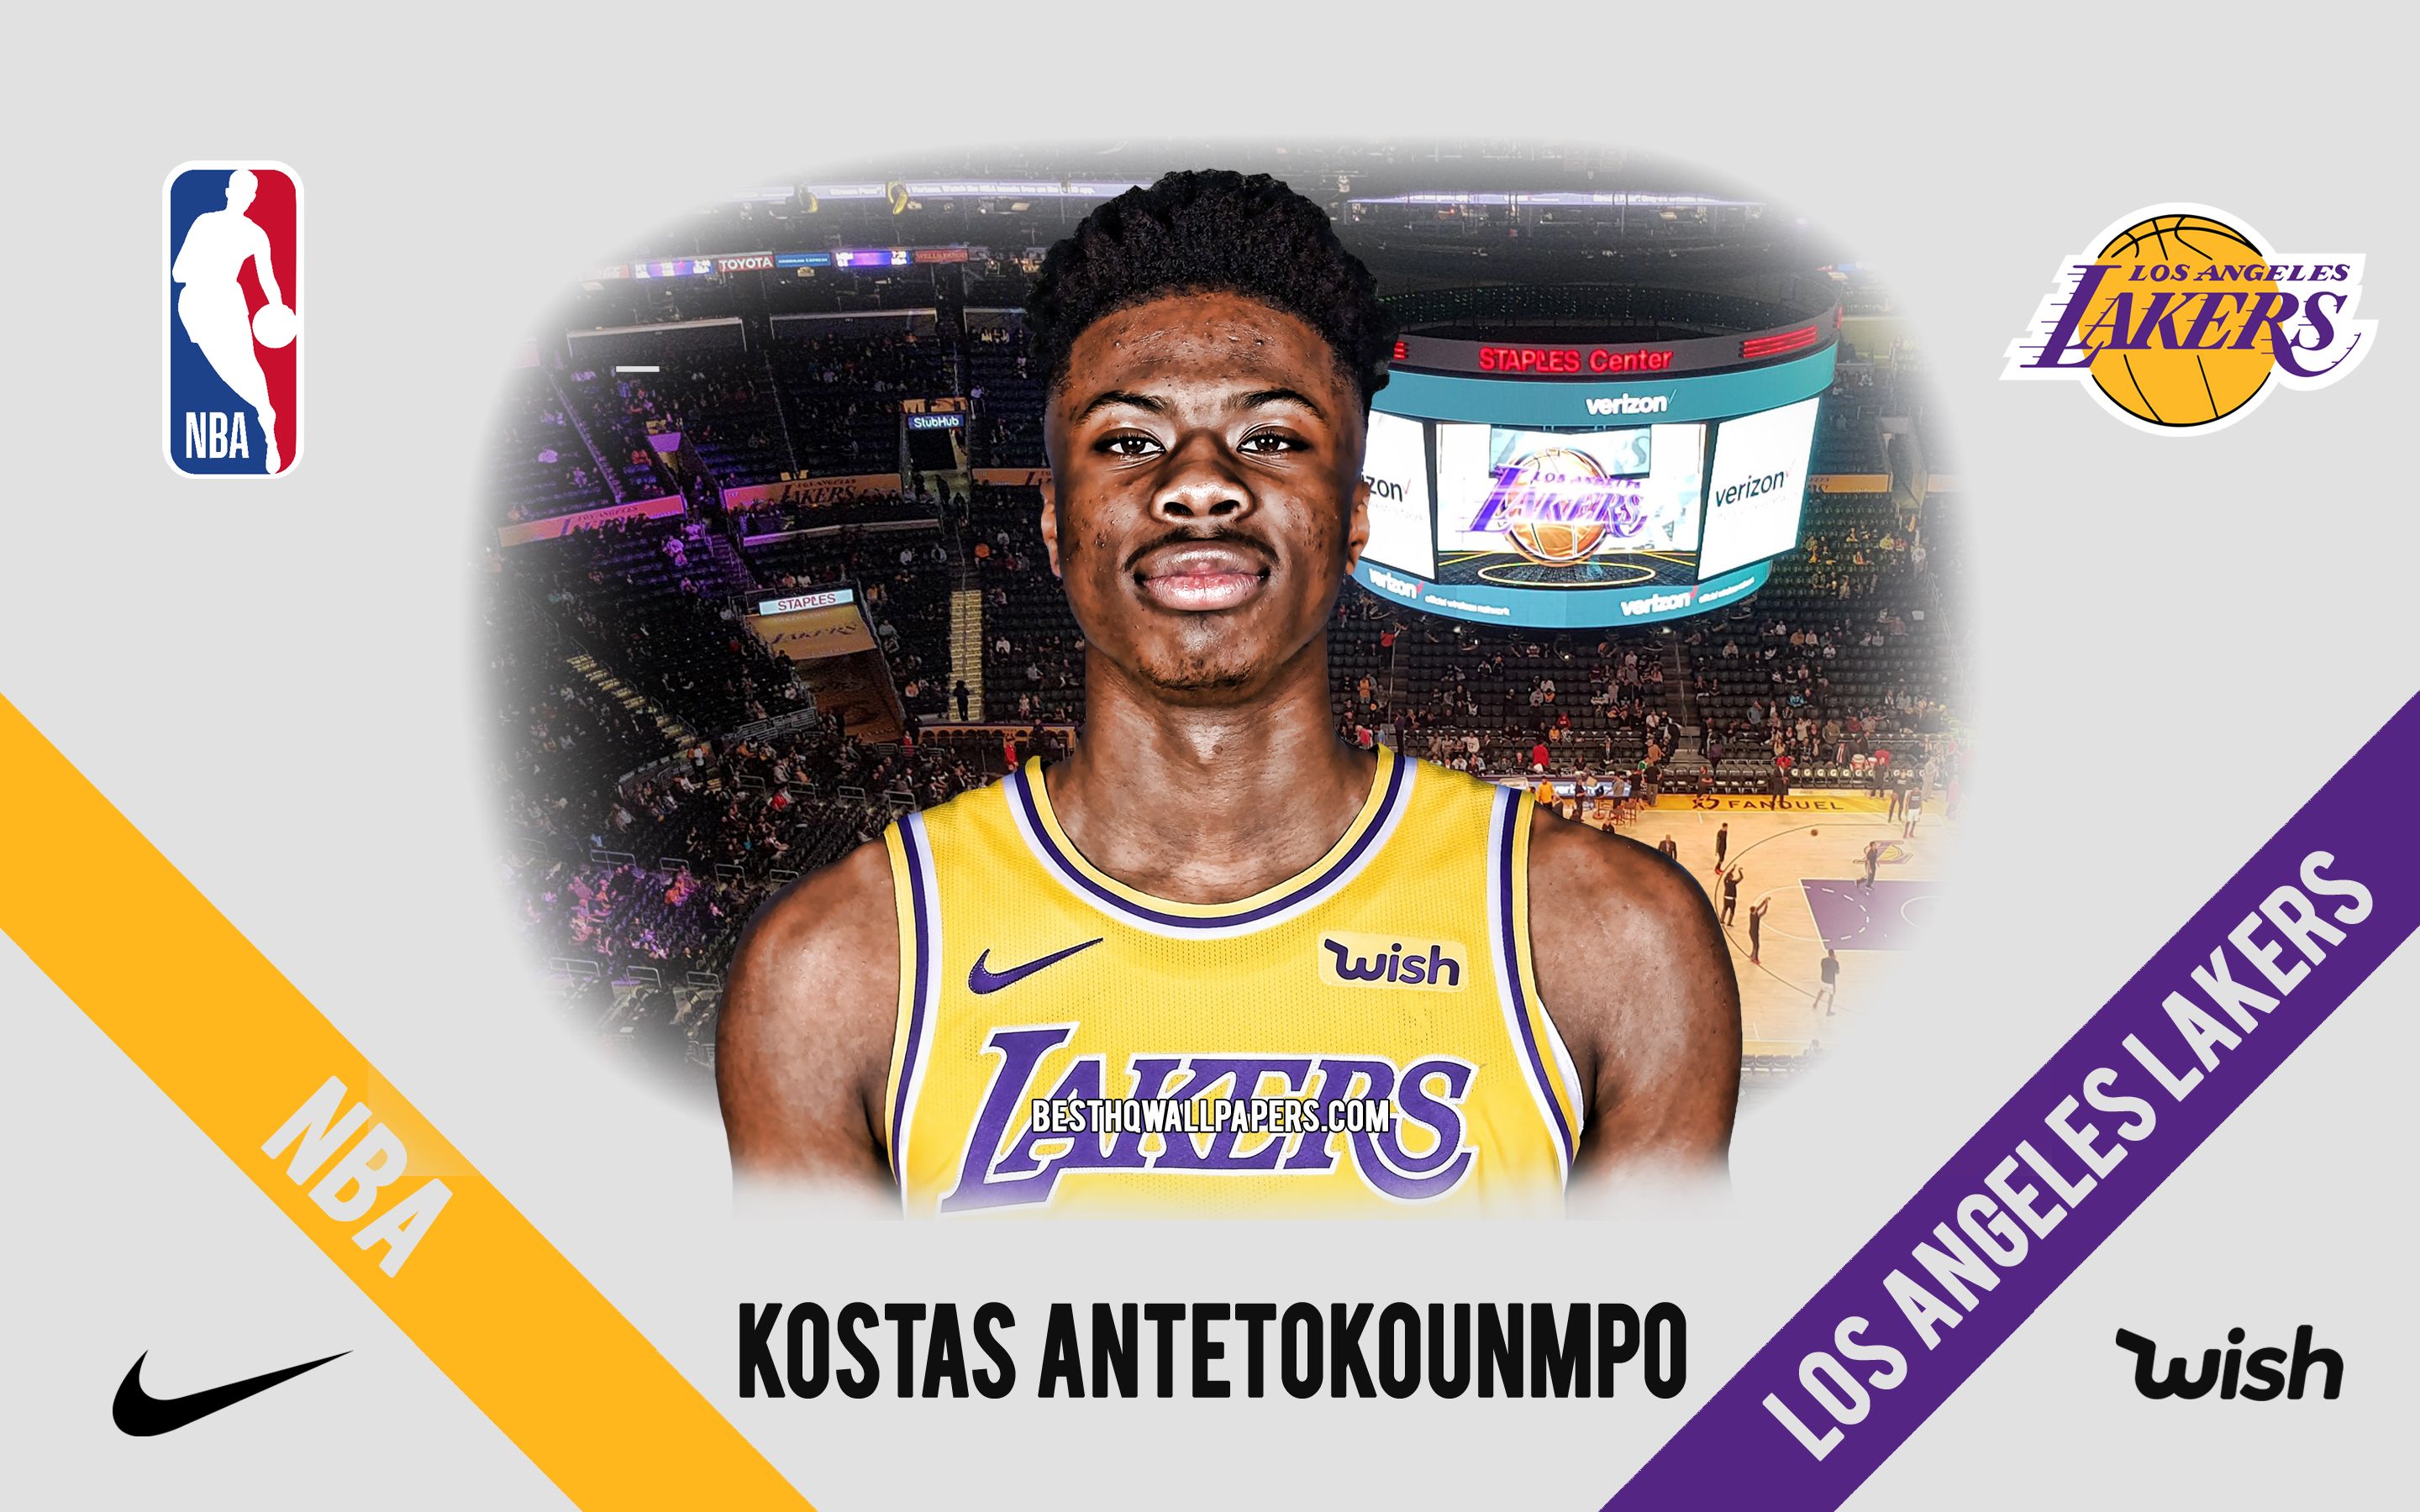 Download wallpaper Kostas Antetokounmpo, Los Angeles Lakers, Greek Basketball Player, NBA, portrait, USA, basketball, Staples Center, Los Angeles Lakers logo for desktop with resolution 2880x1800. High Quality HD picture wallpaper